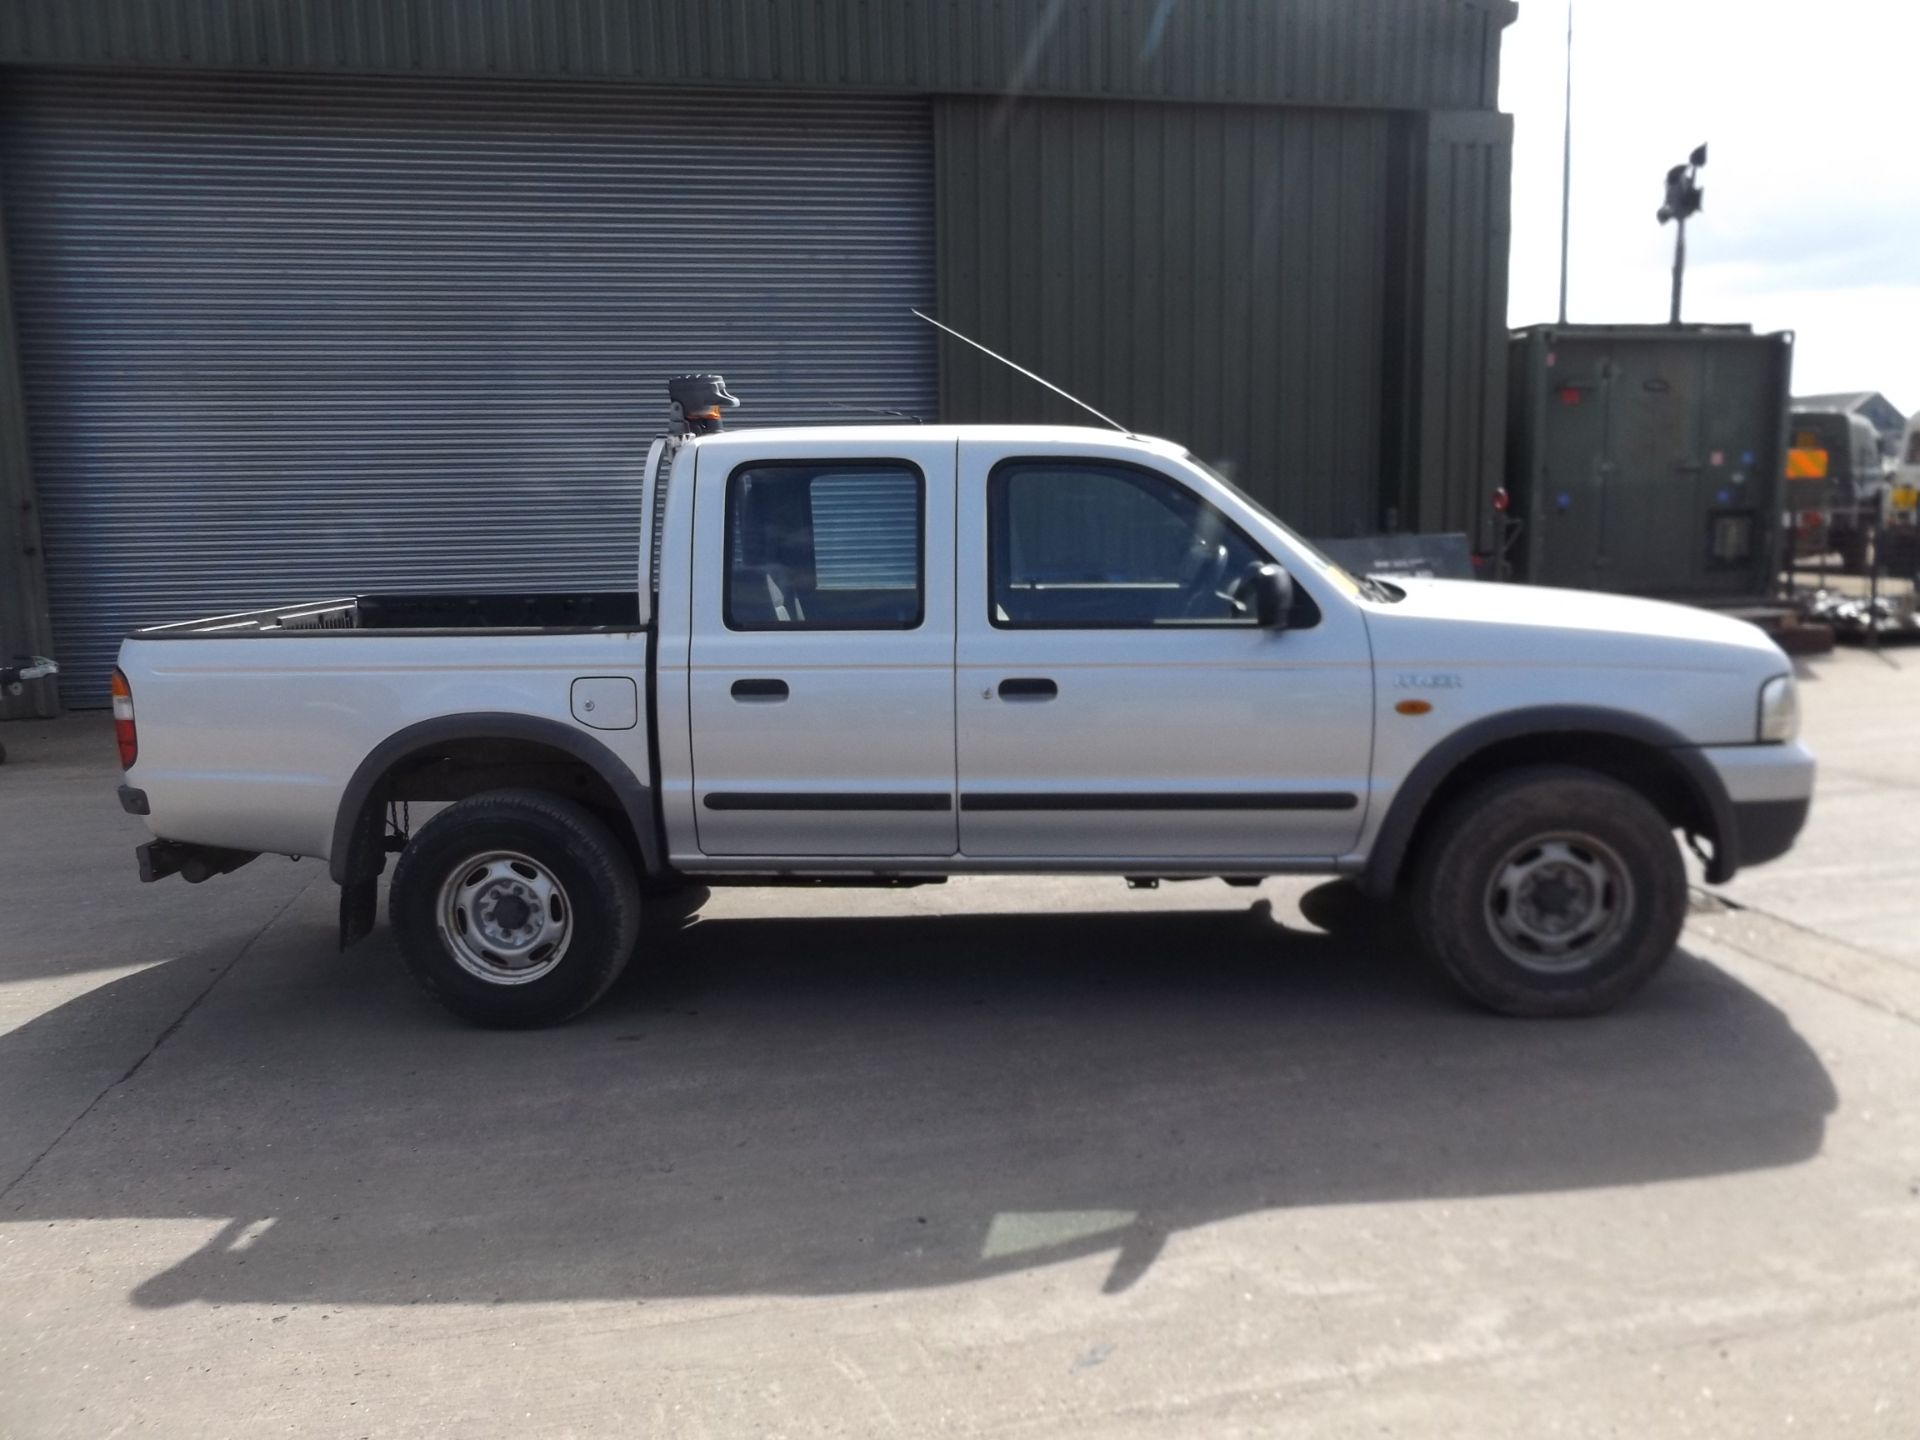 Ford Ranger Double cab pick up - Image 5 of 15